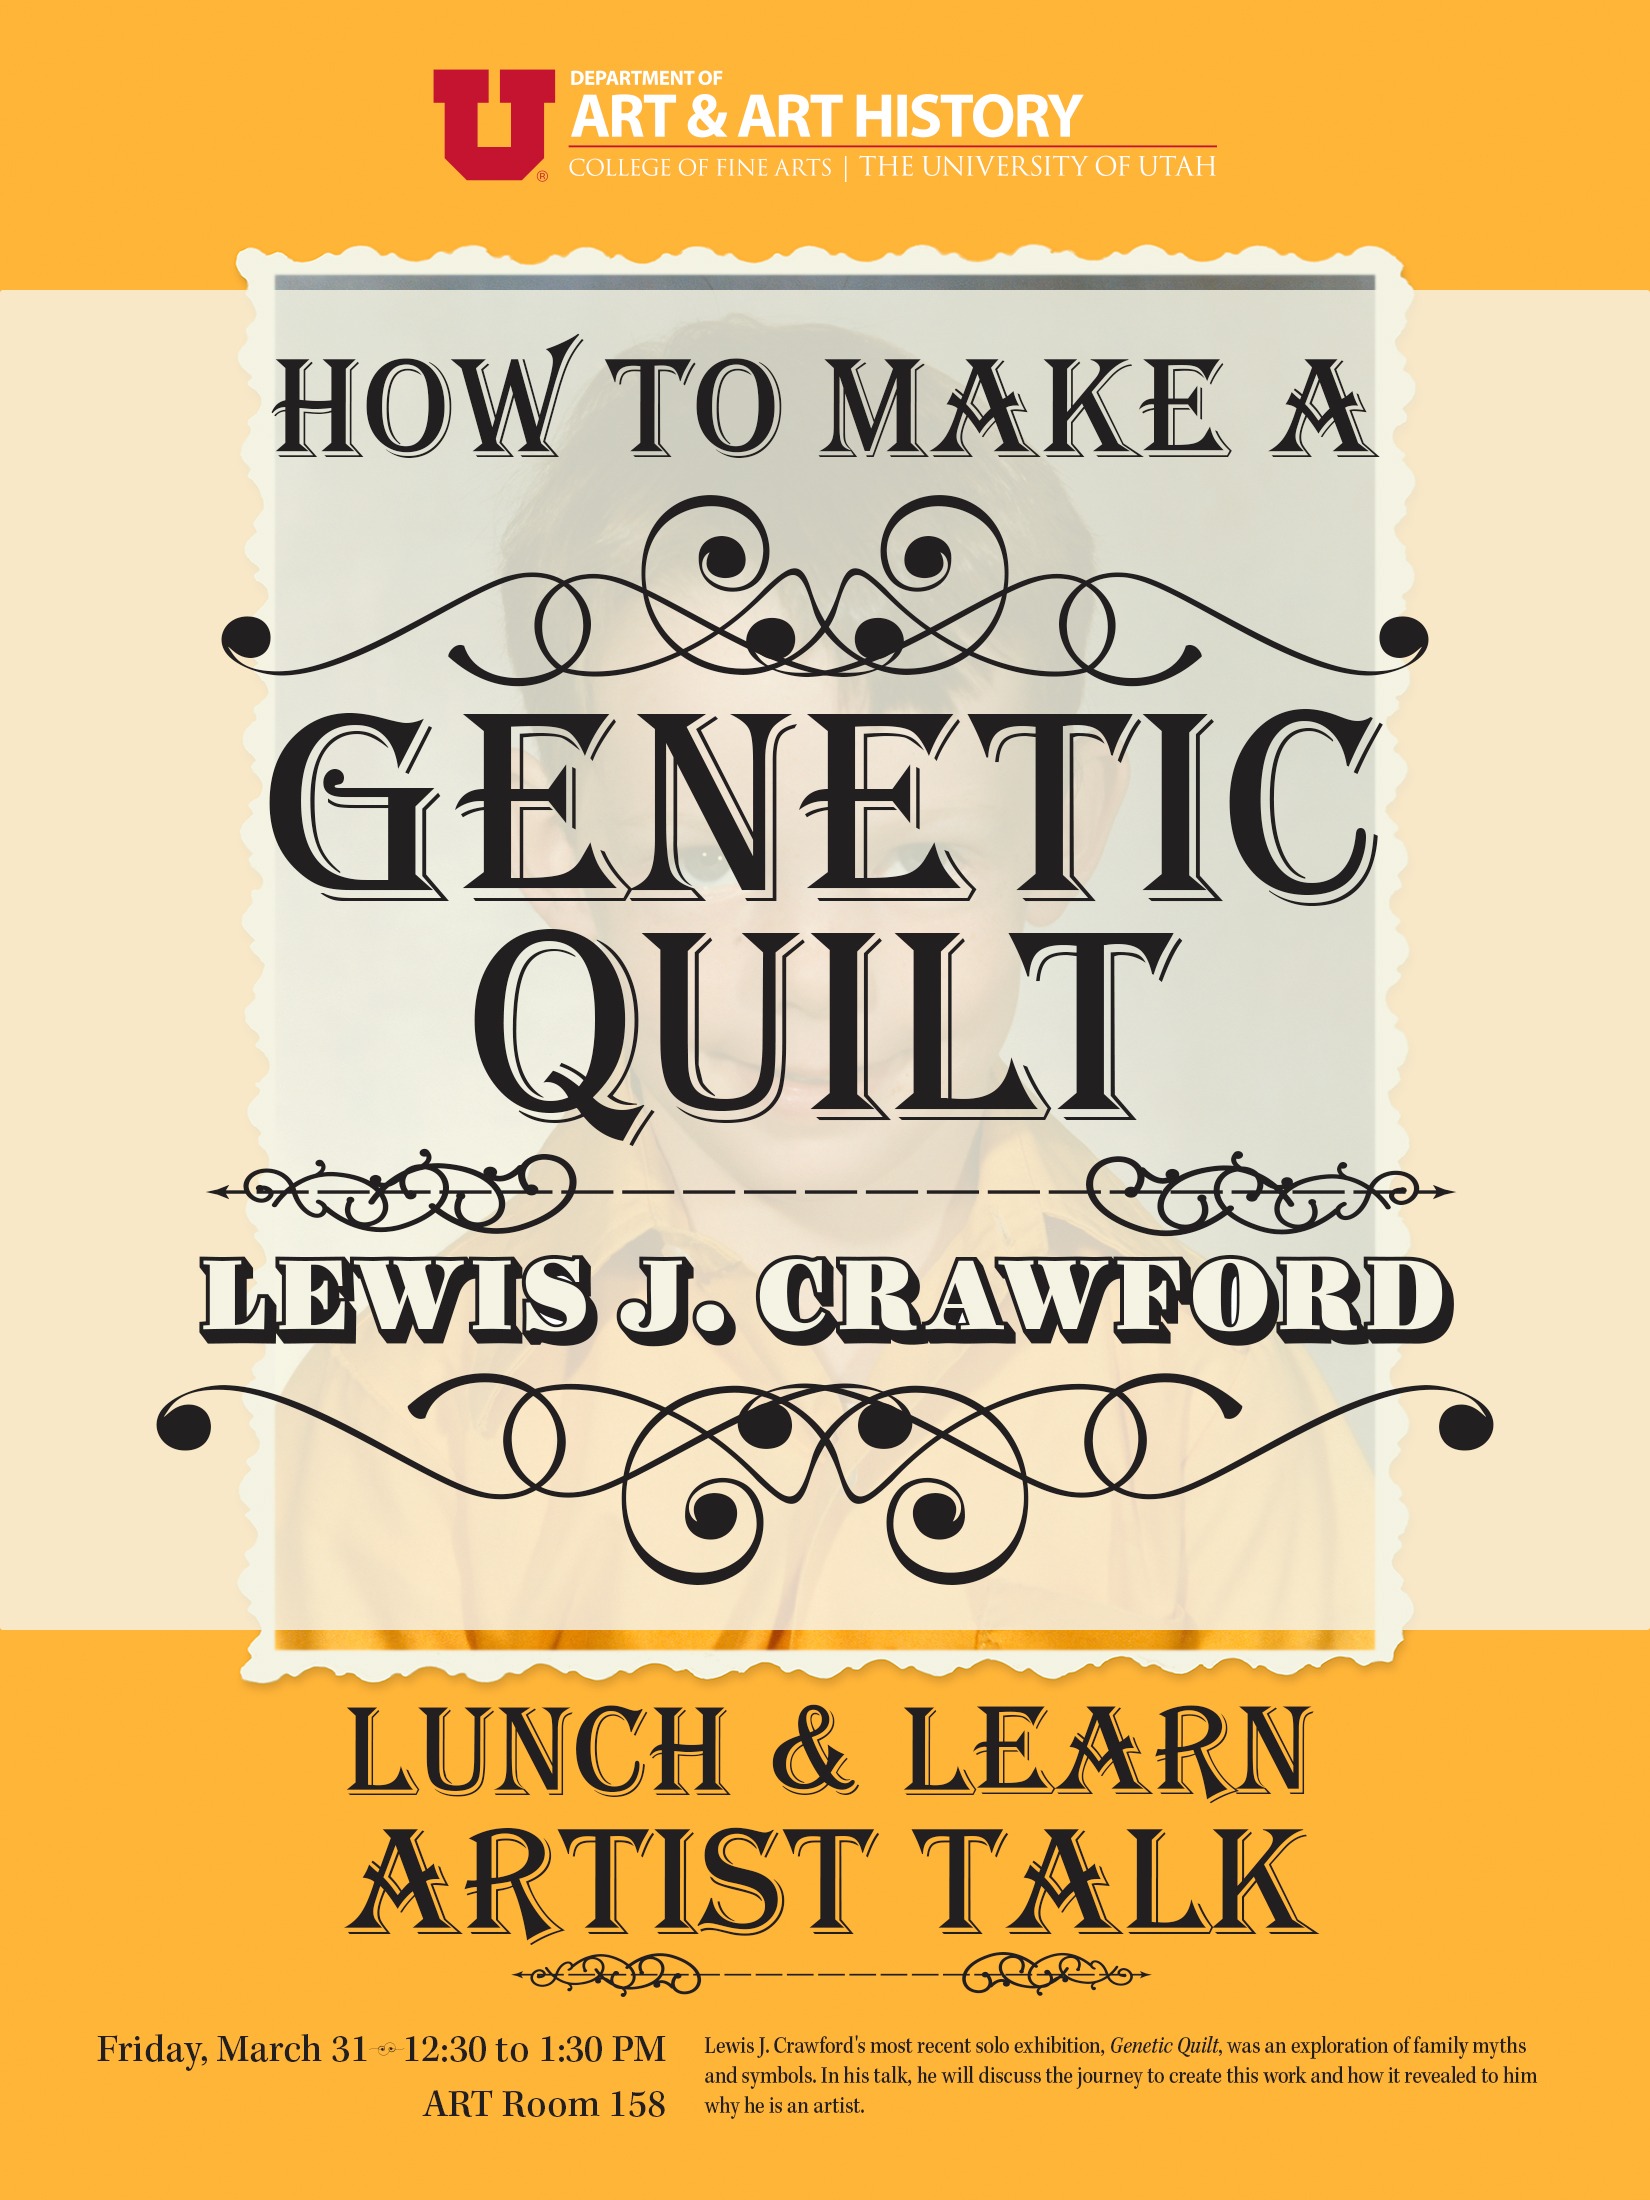 How to Make a Genetic Quilt, Lewis J. Crawford